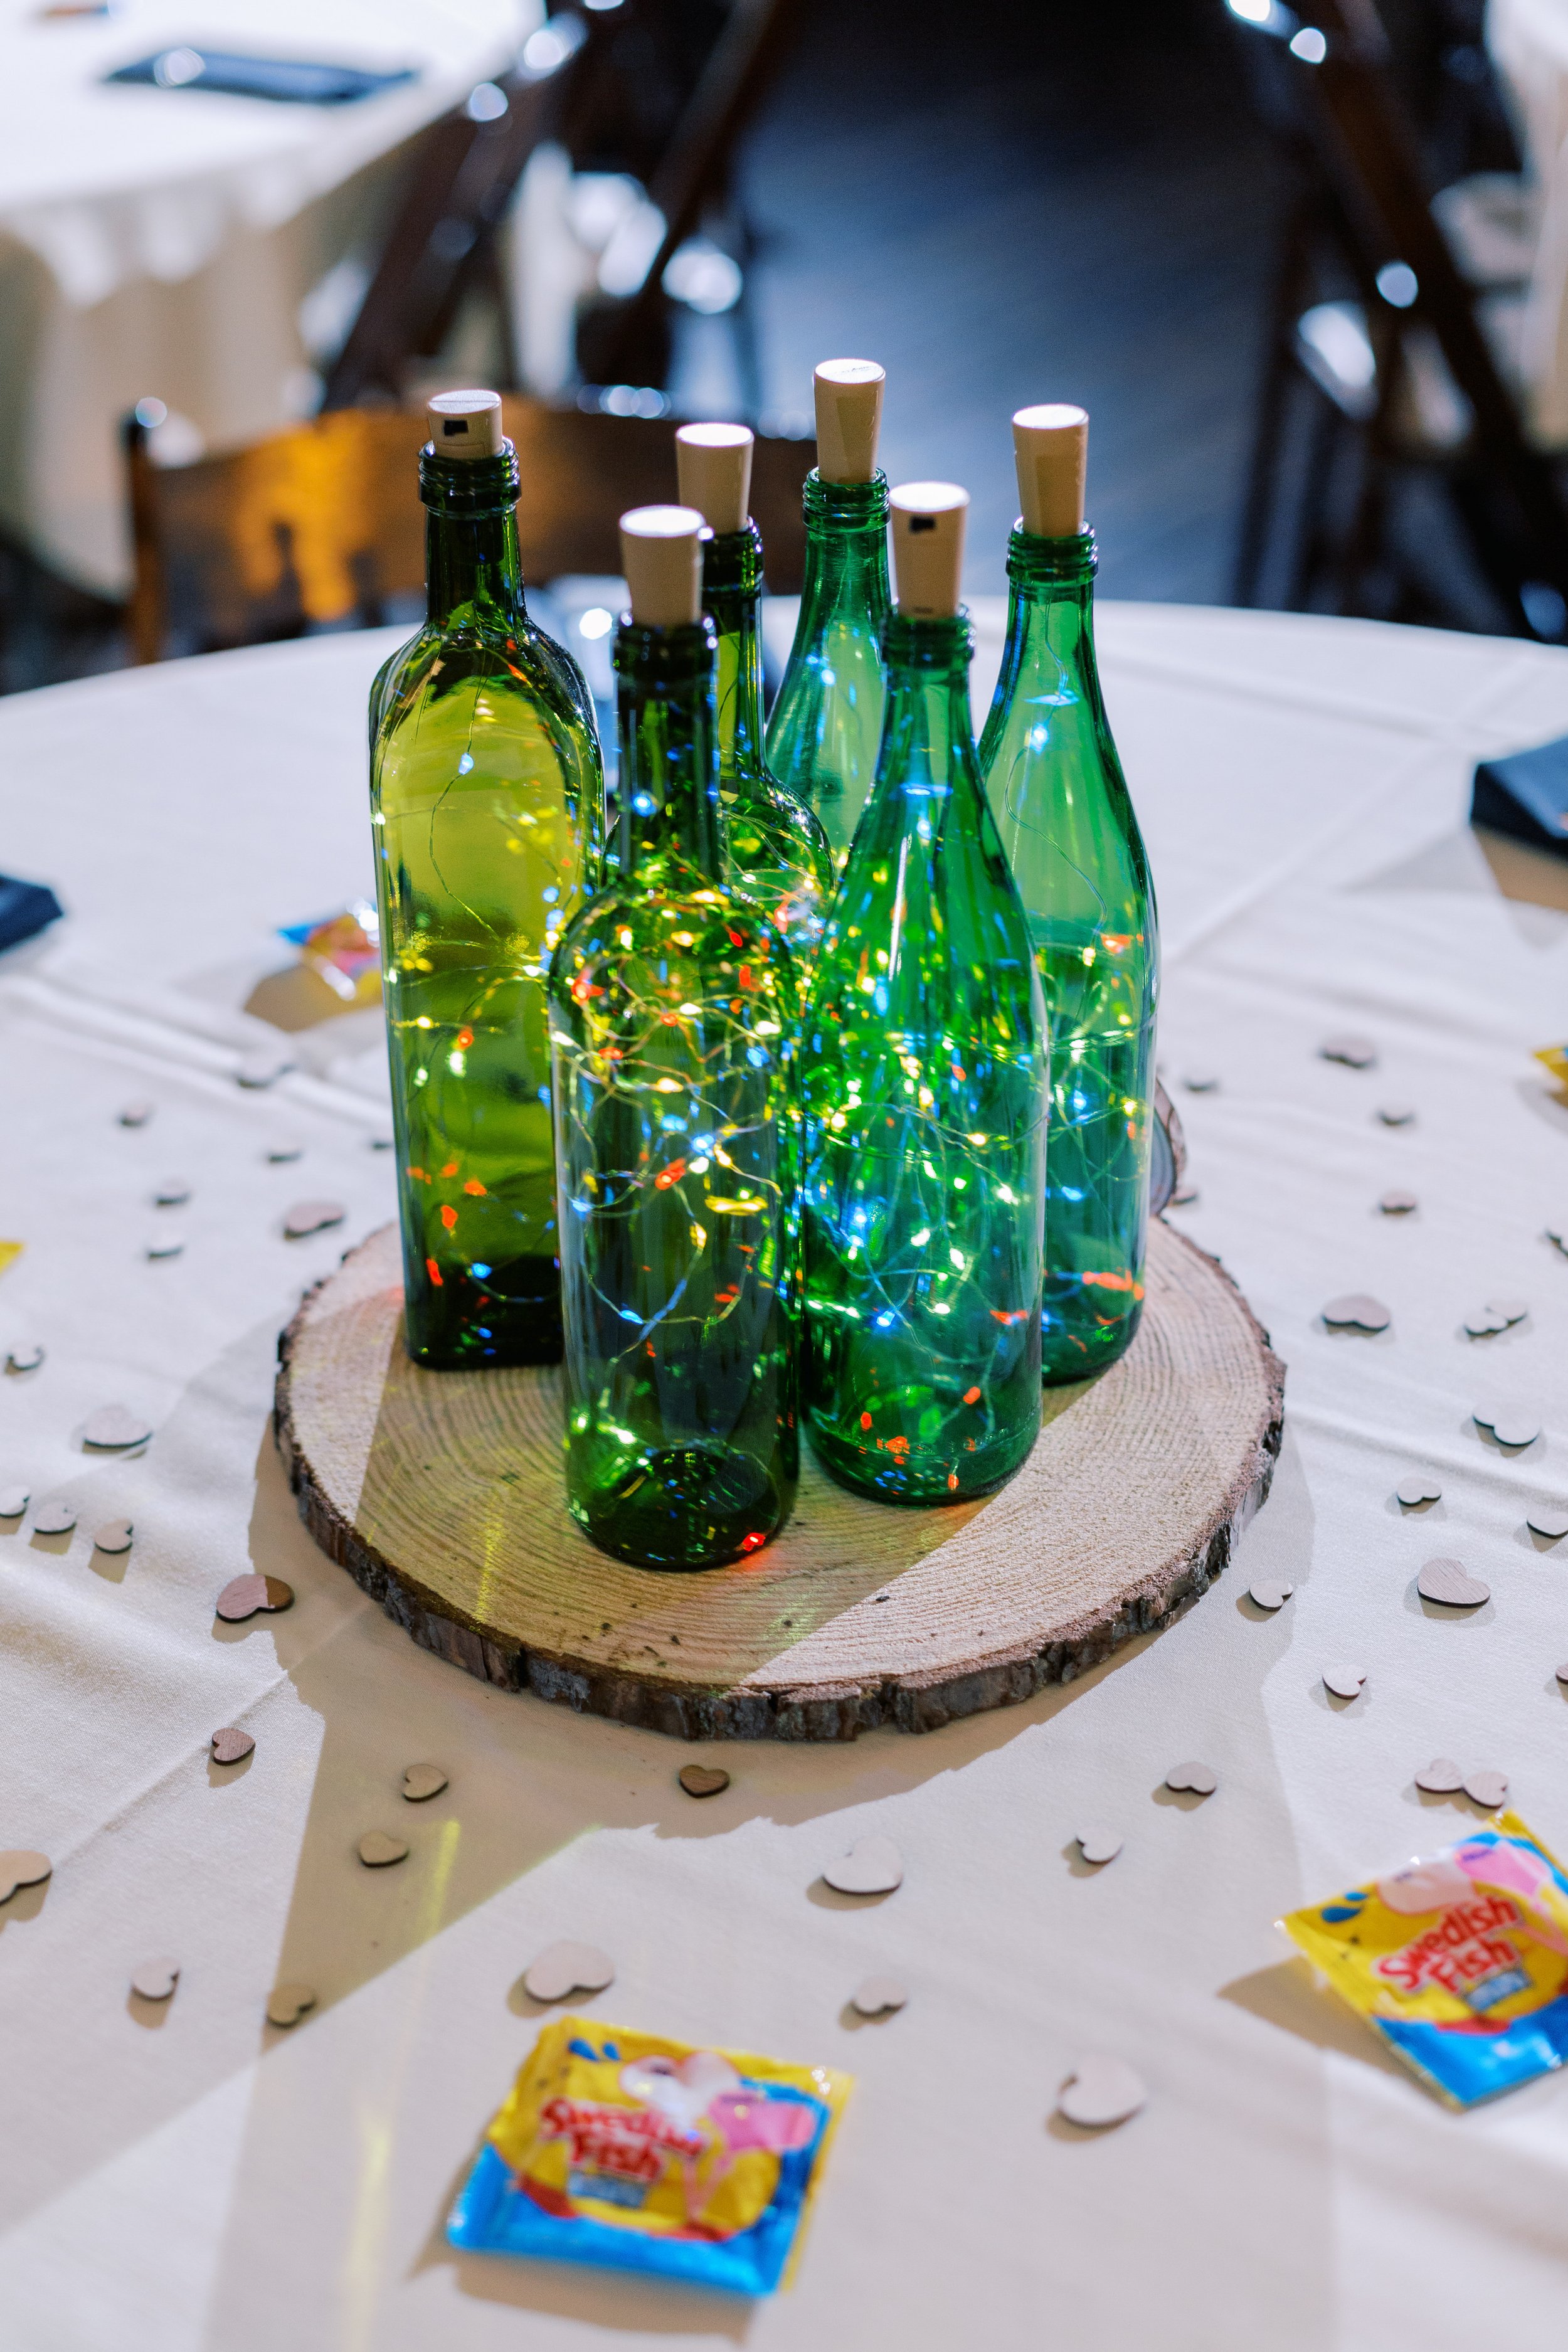 Green Bottle Centerpiece Reception Decor Wedding at All Saints Chapel Raleigh NC Fancy This Photography